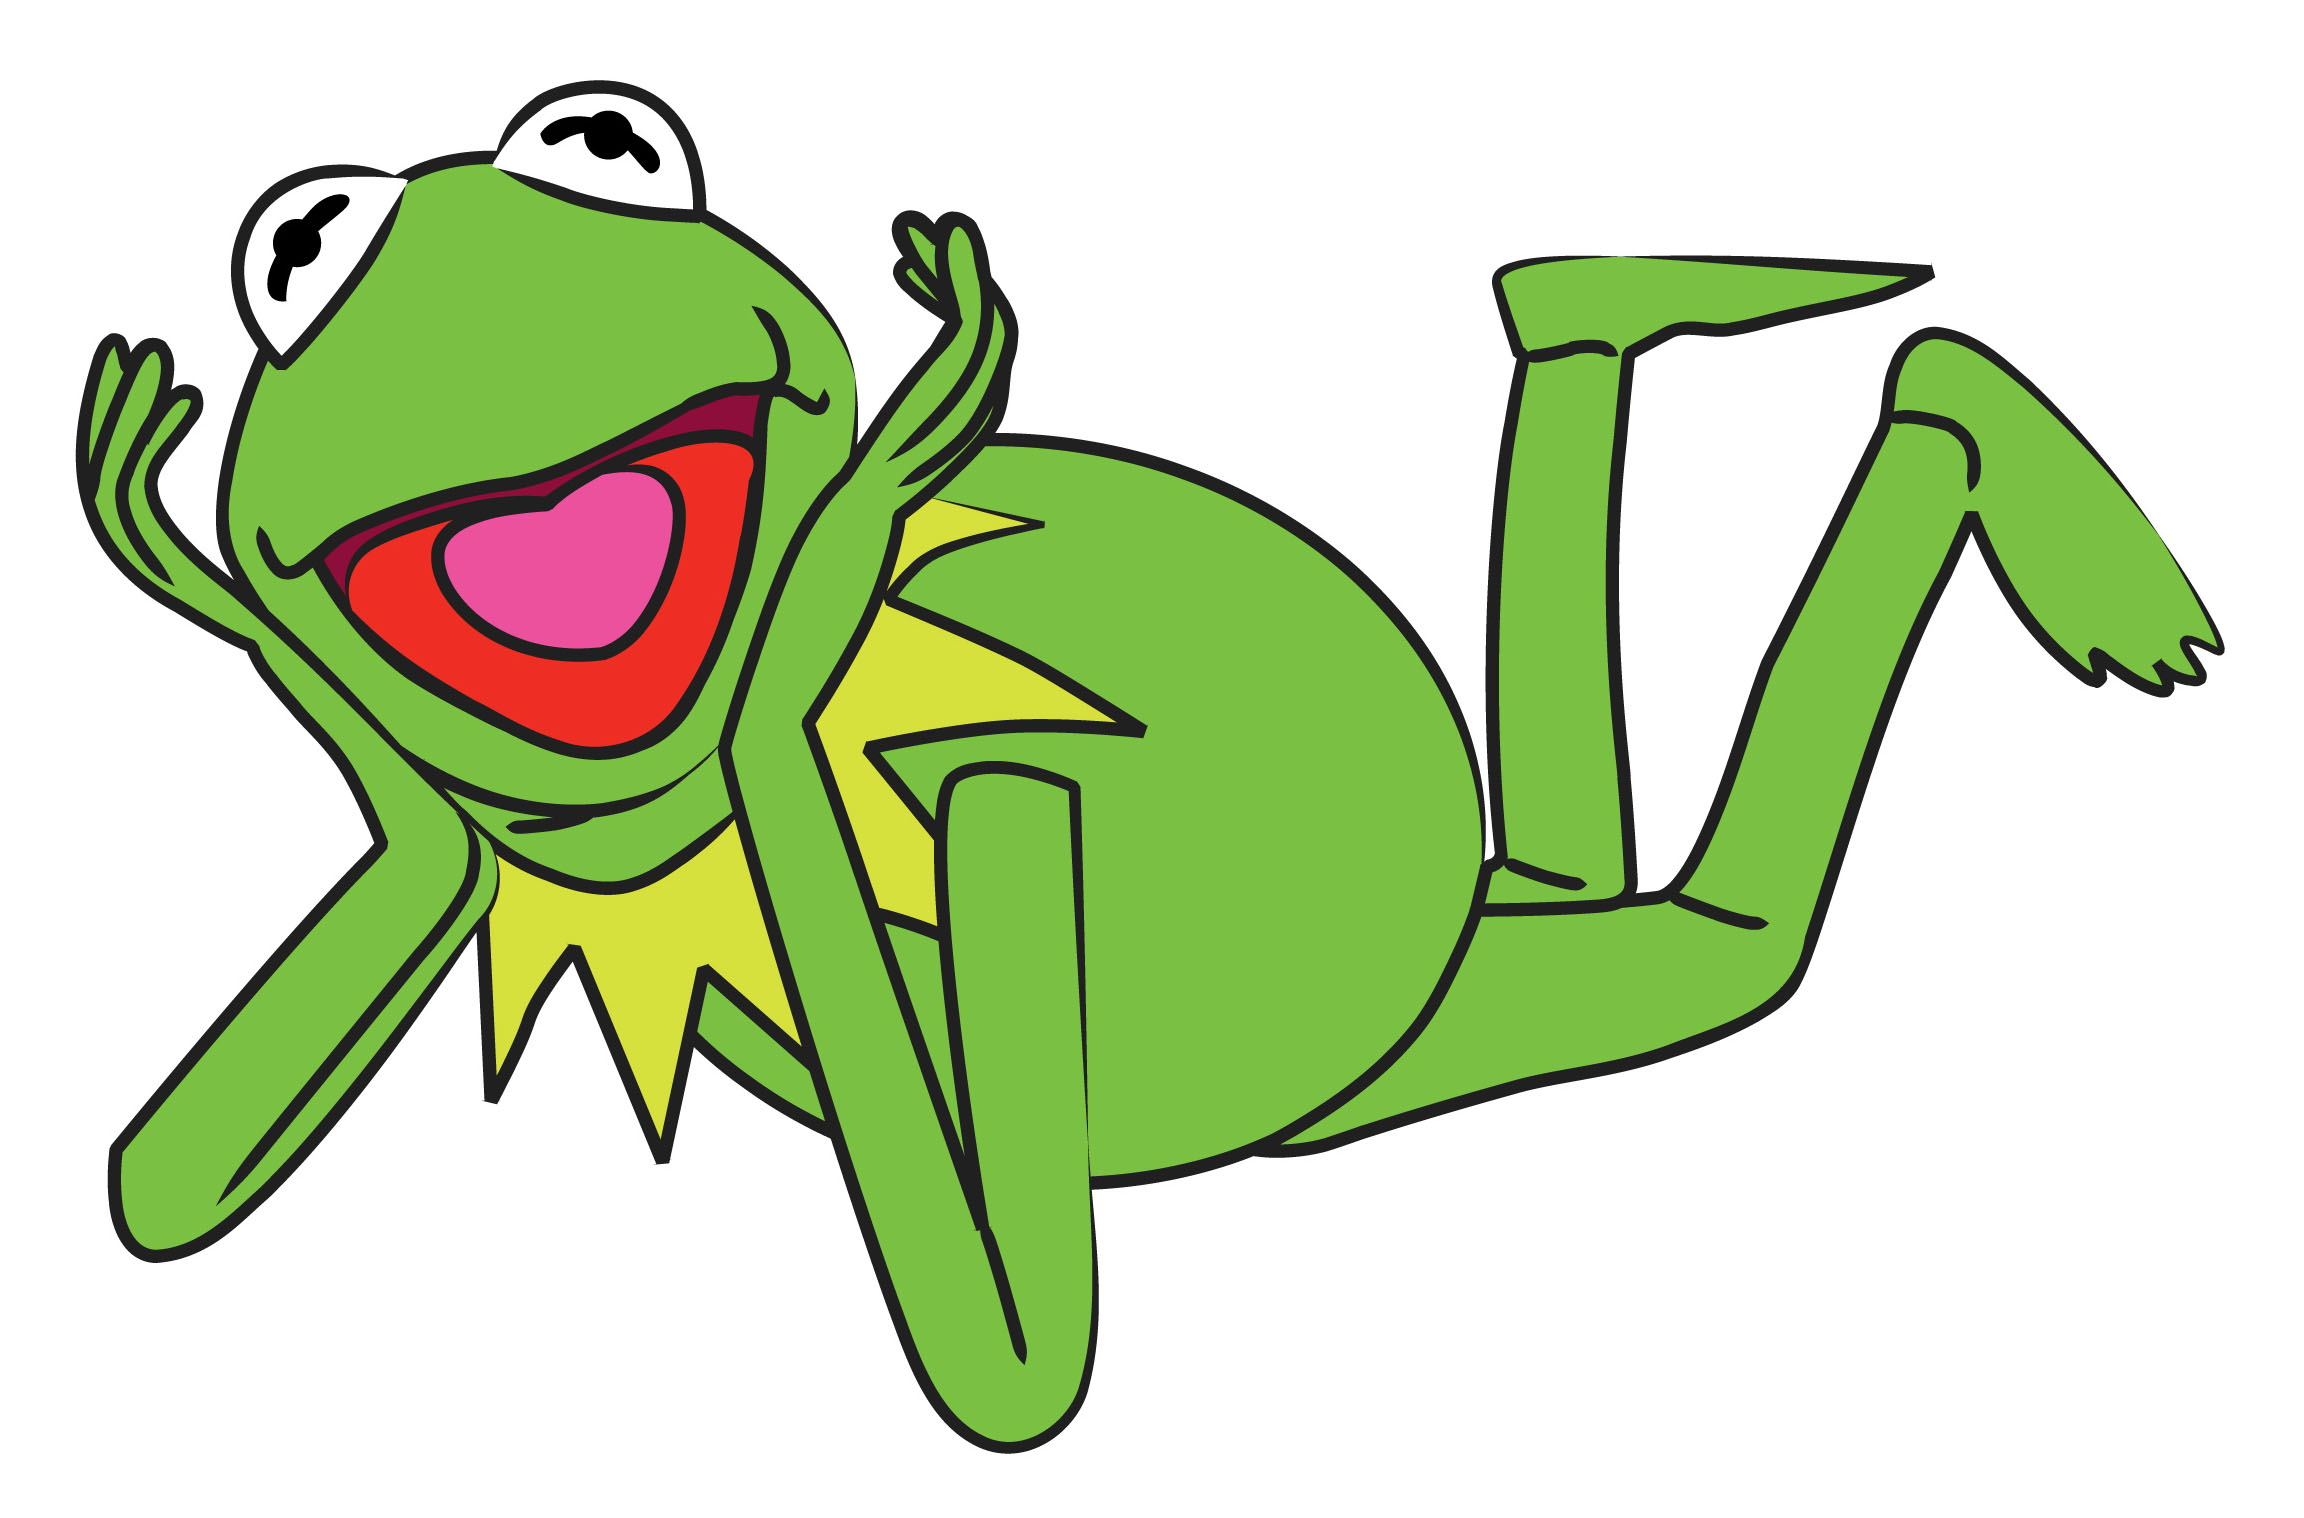 Cartoon Frog Drawings - Cliparts.co